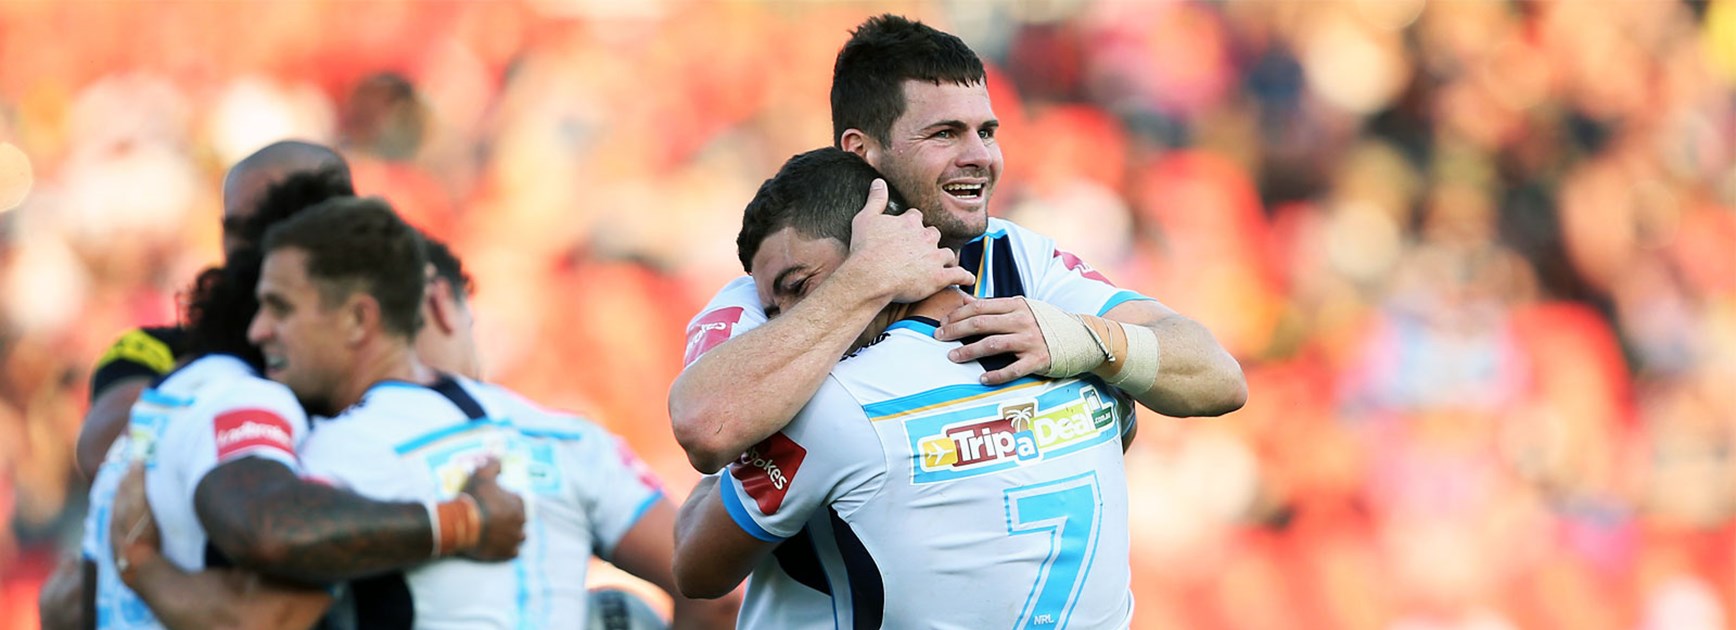 The Gold Coast Titans celebrate their match-winning try against Penrith on Sunday